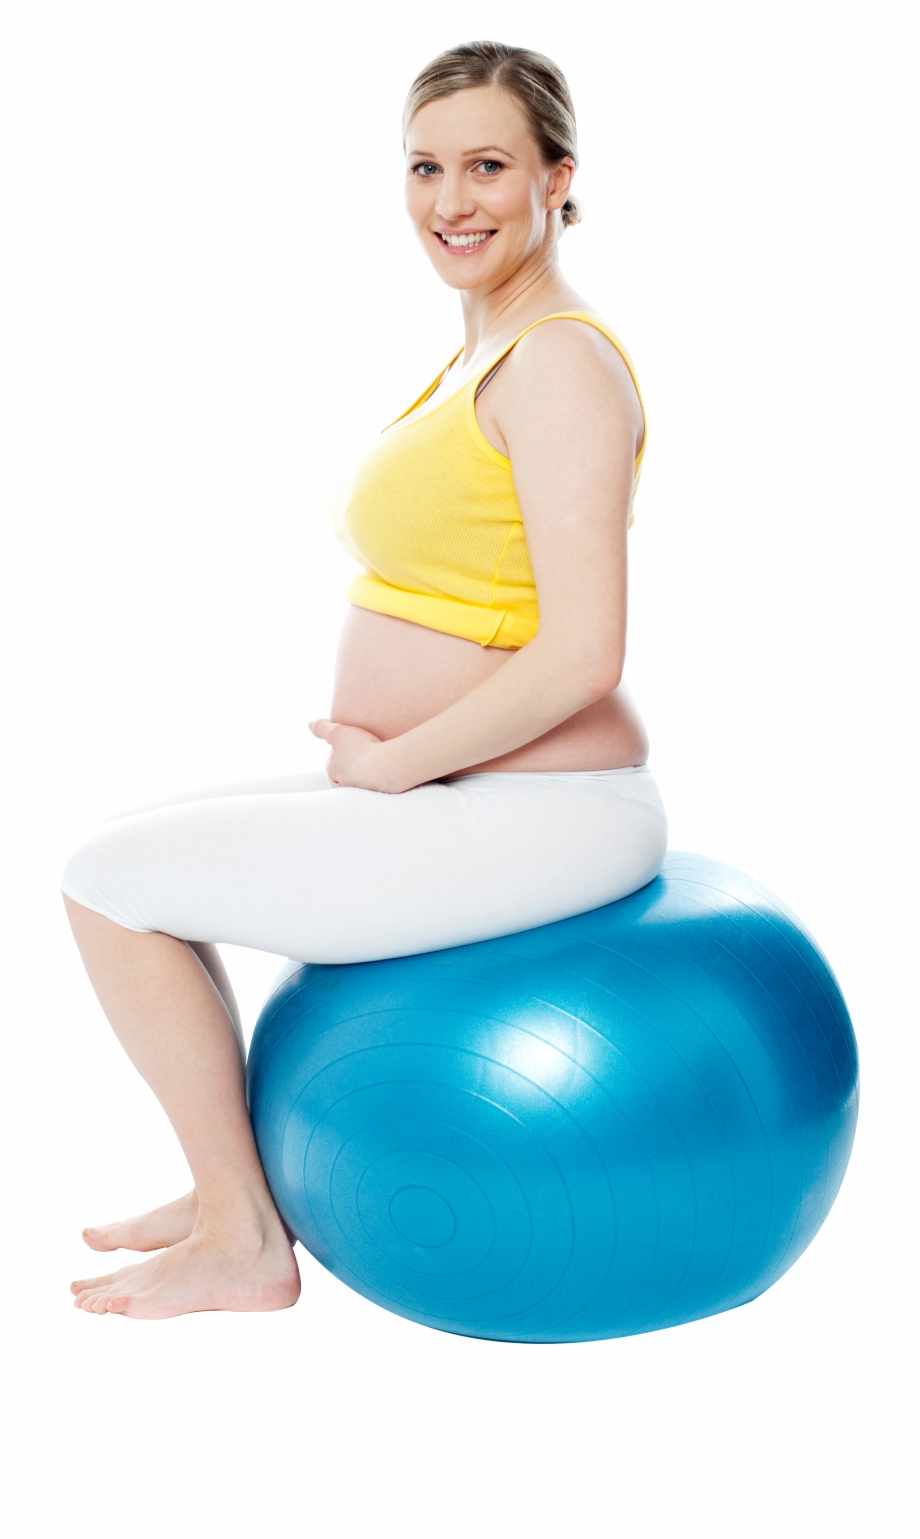 Pregnant Woman Exercise Pregnant Women Exercise Png